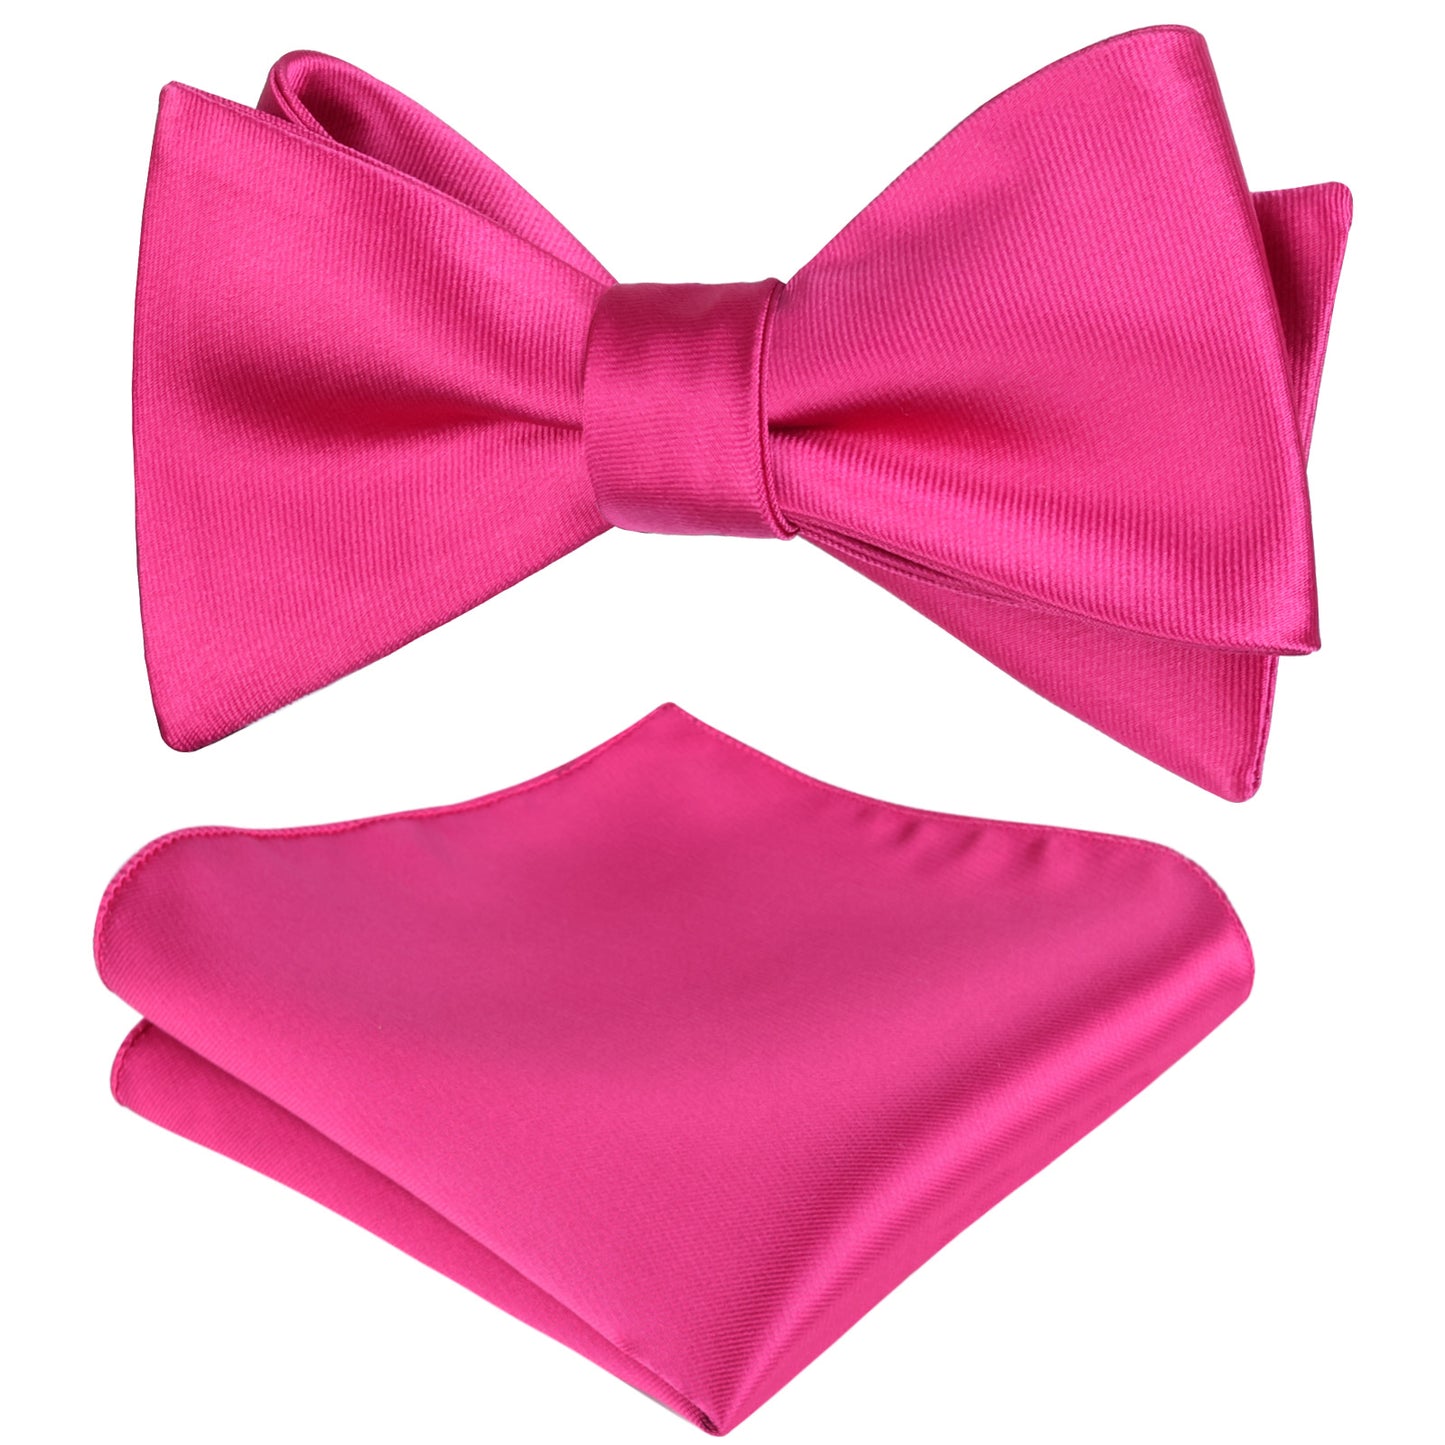 Alizeal Solid Color Self-tied Bow Tie and Hanky Set for Adults Dress Formal Wear, #036